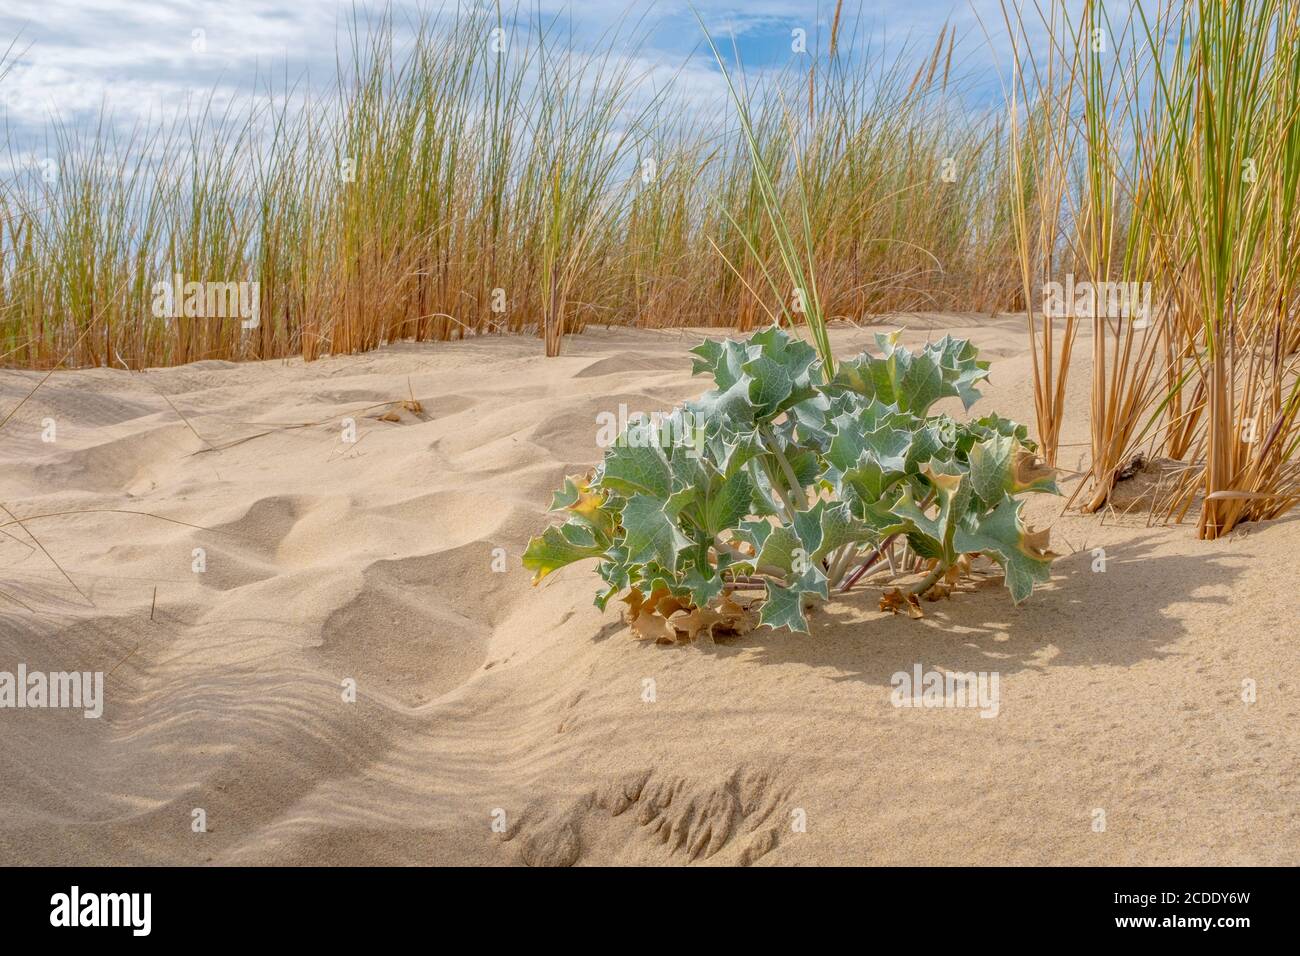 Eryngium maritimum growing in sand with grass and sky in the background Stock Photo